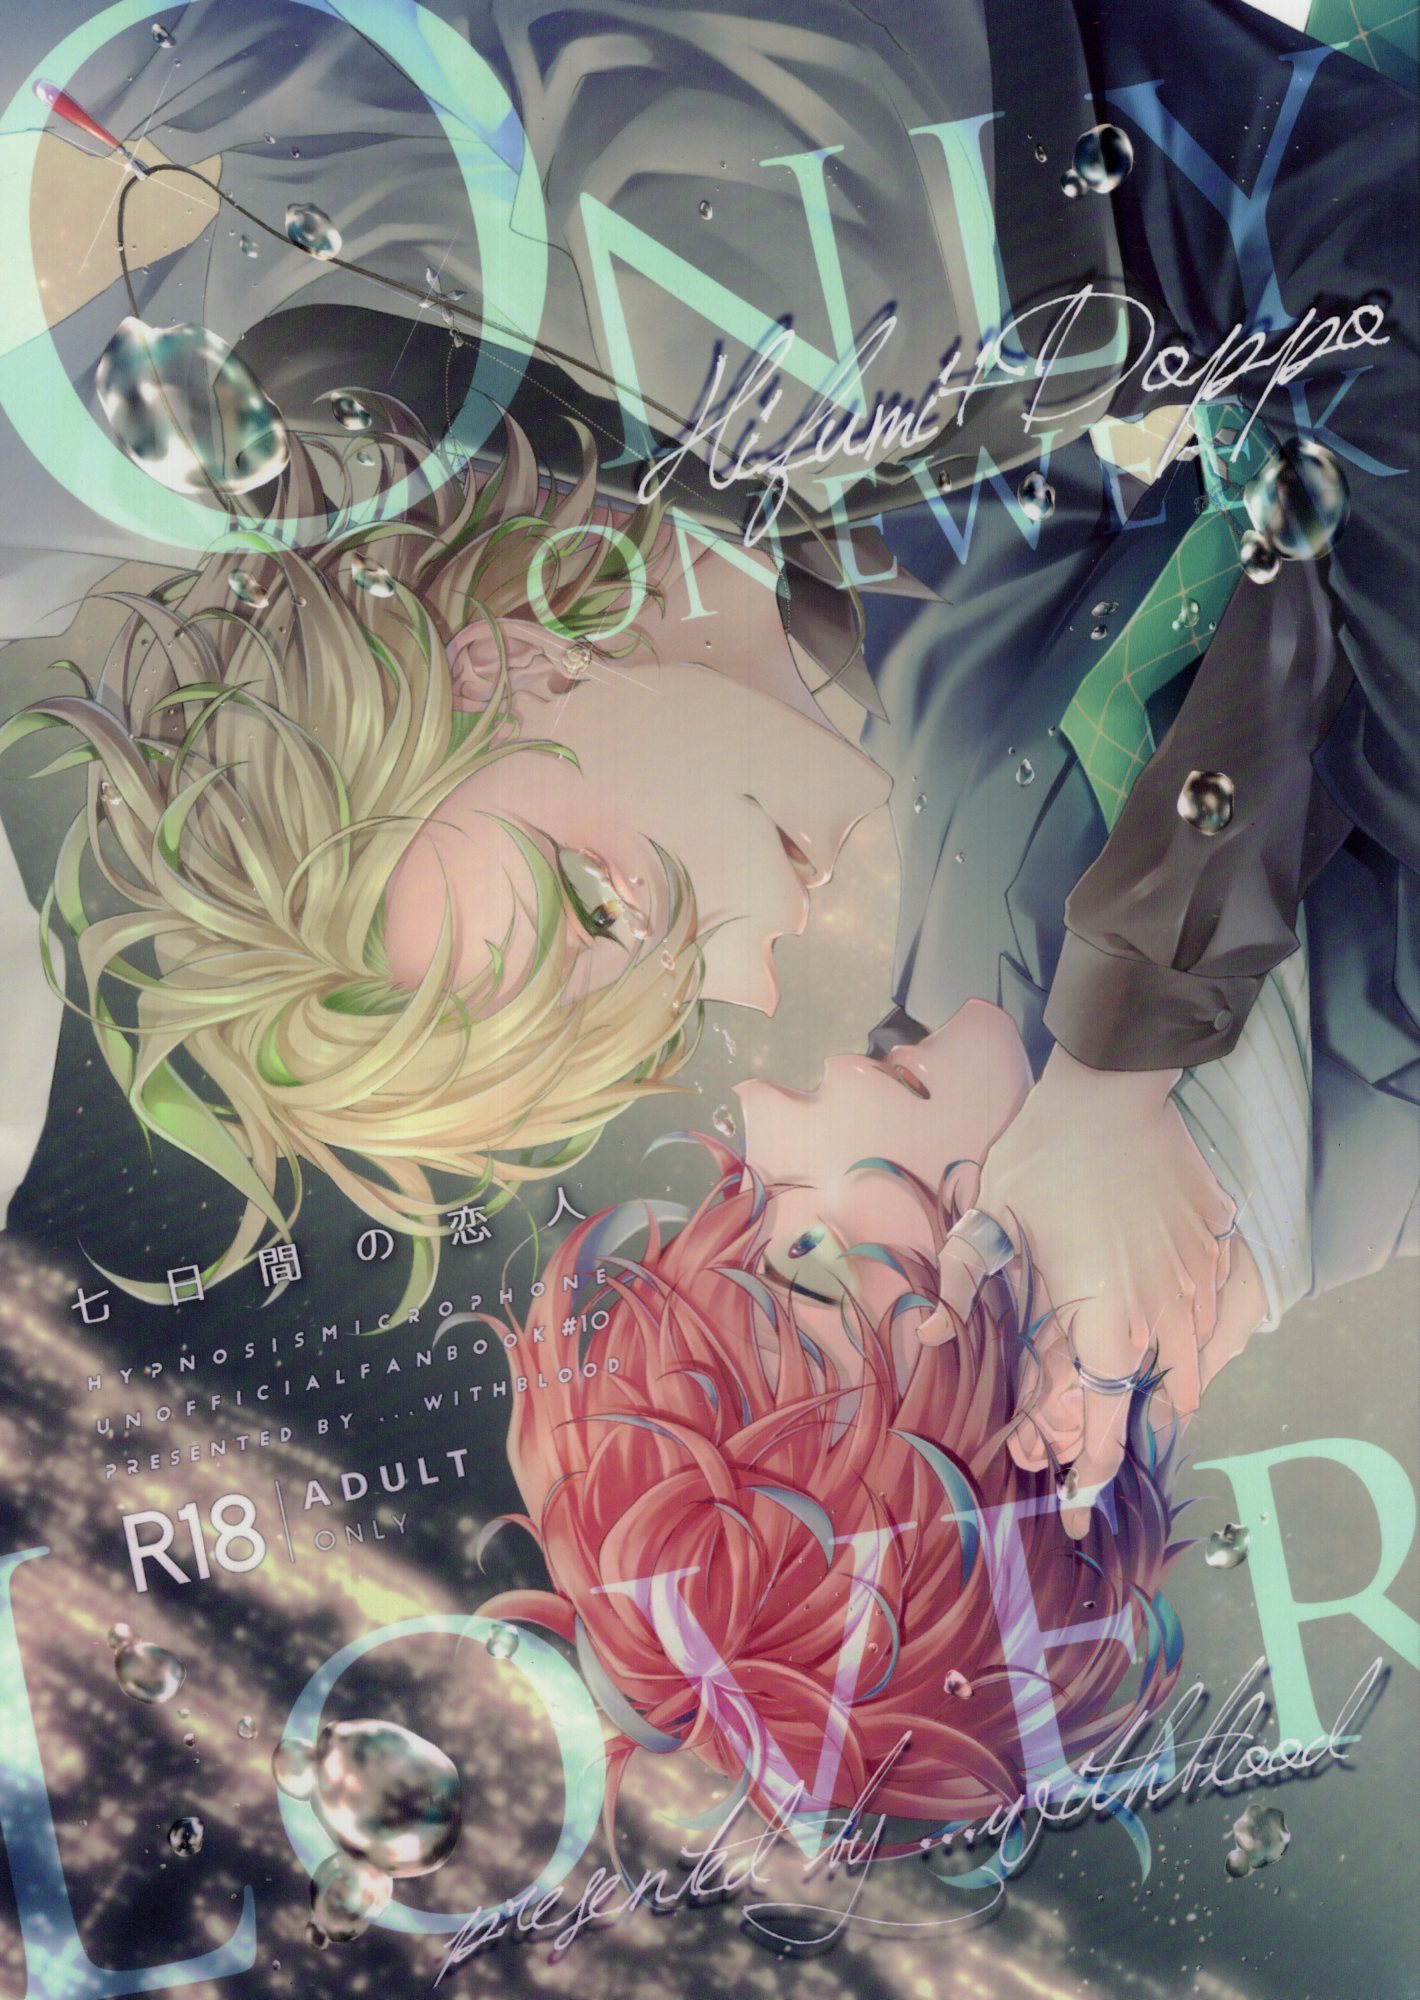 [Boys Love (Yaoi) : R18] Doujinshi - Hypnosismic / Hifumi x Doppo (七日間の恋人 ONLY ONE WEEK LOVER) / ...with blood